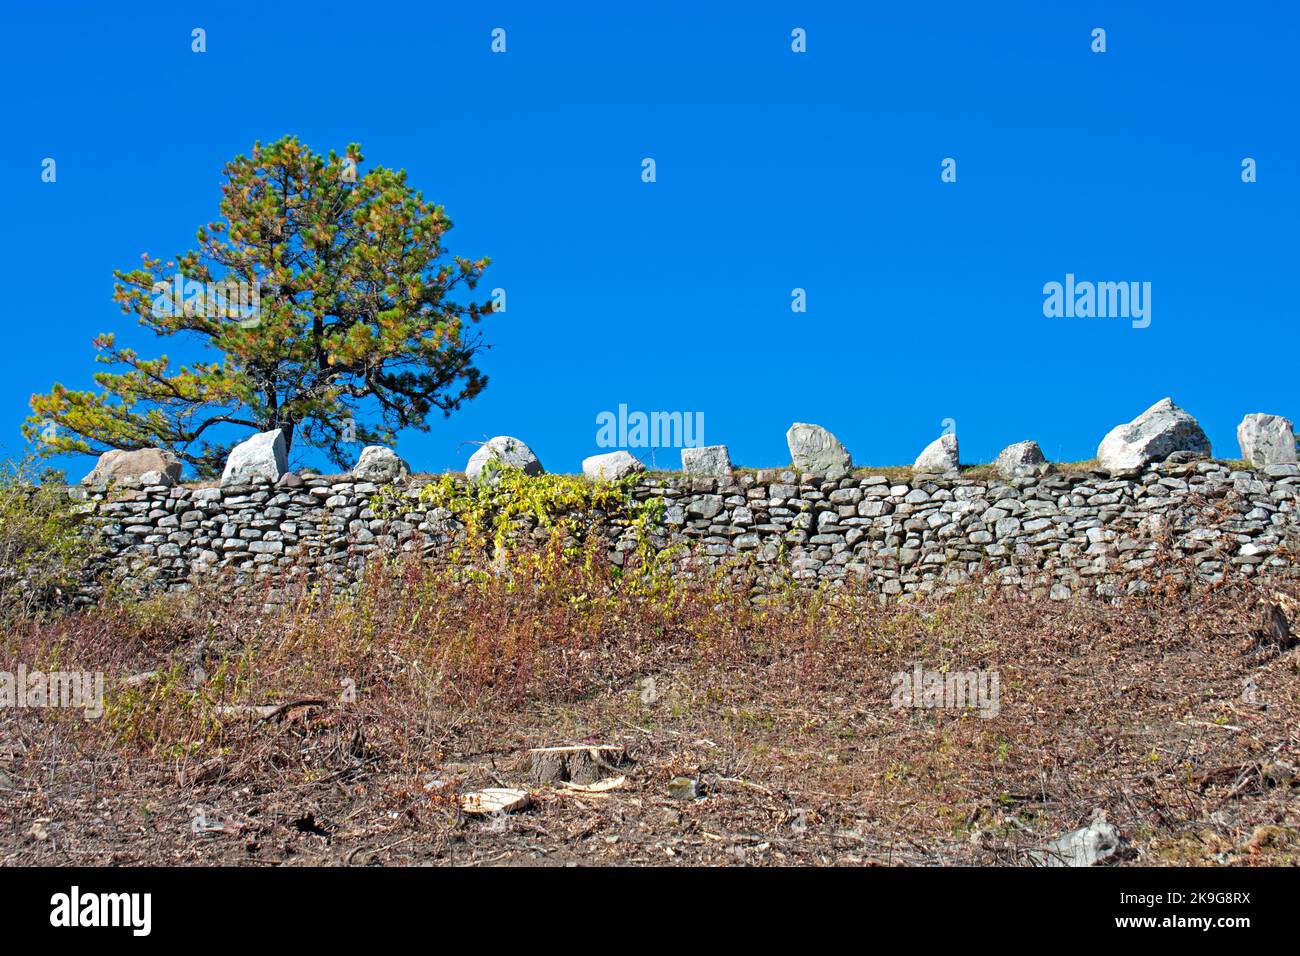 View of a stone wall and a lone tree against a blue sky at High Point State Park in Wantage, New Jersey -01 Stock Photo